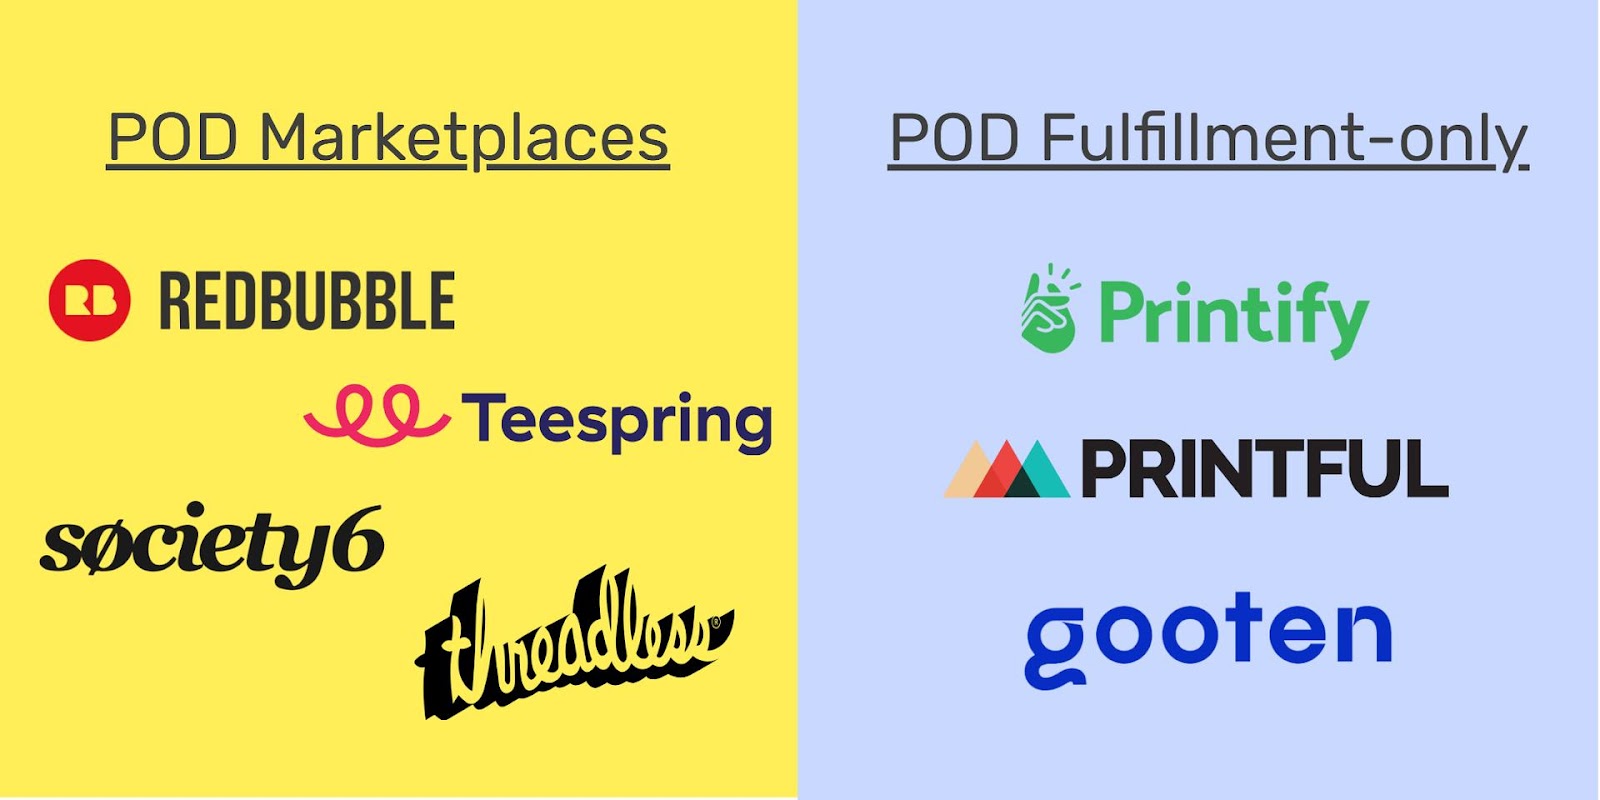 Print on demand marketplaces vs fulfillment-only services